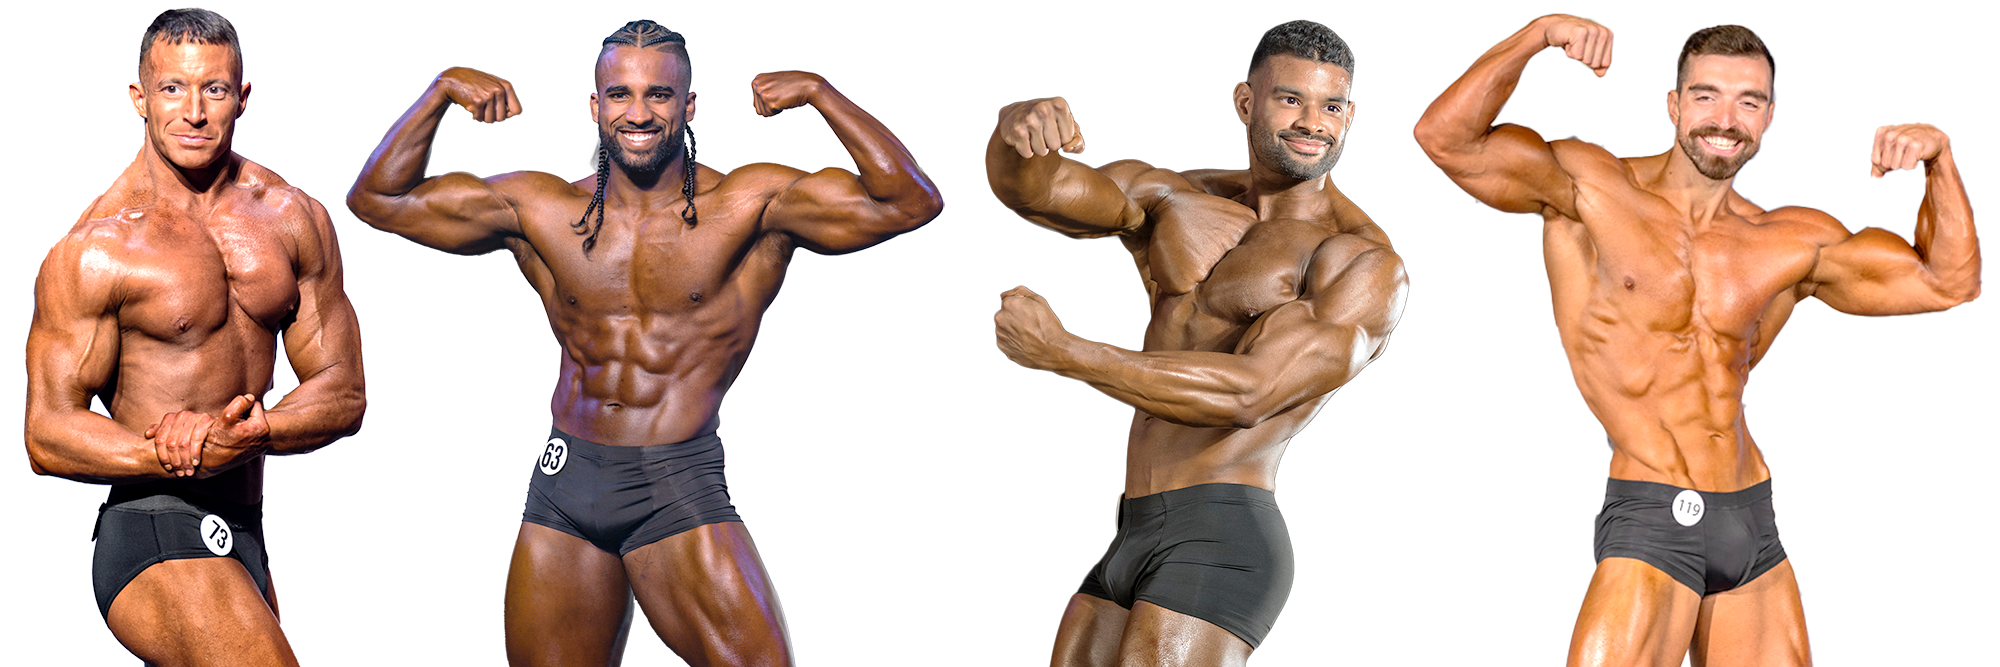 Classic Posing Academy by Physique Icon + Legendary IFBB Pro Francis  Benfatto + Master Trainer Andrew Oye, Bodybuilding Expert + Posing Coach,  is The Gold Standard in Physique Sport + Physical Art